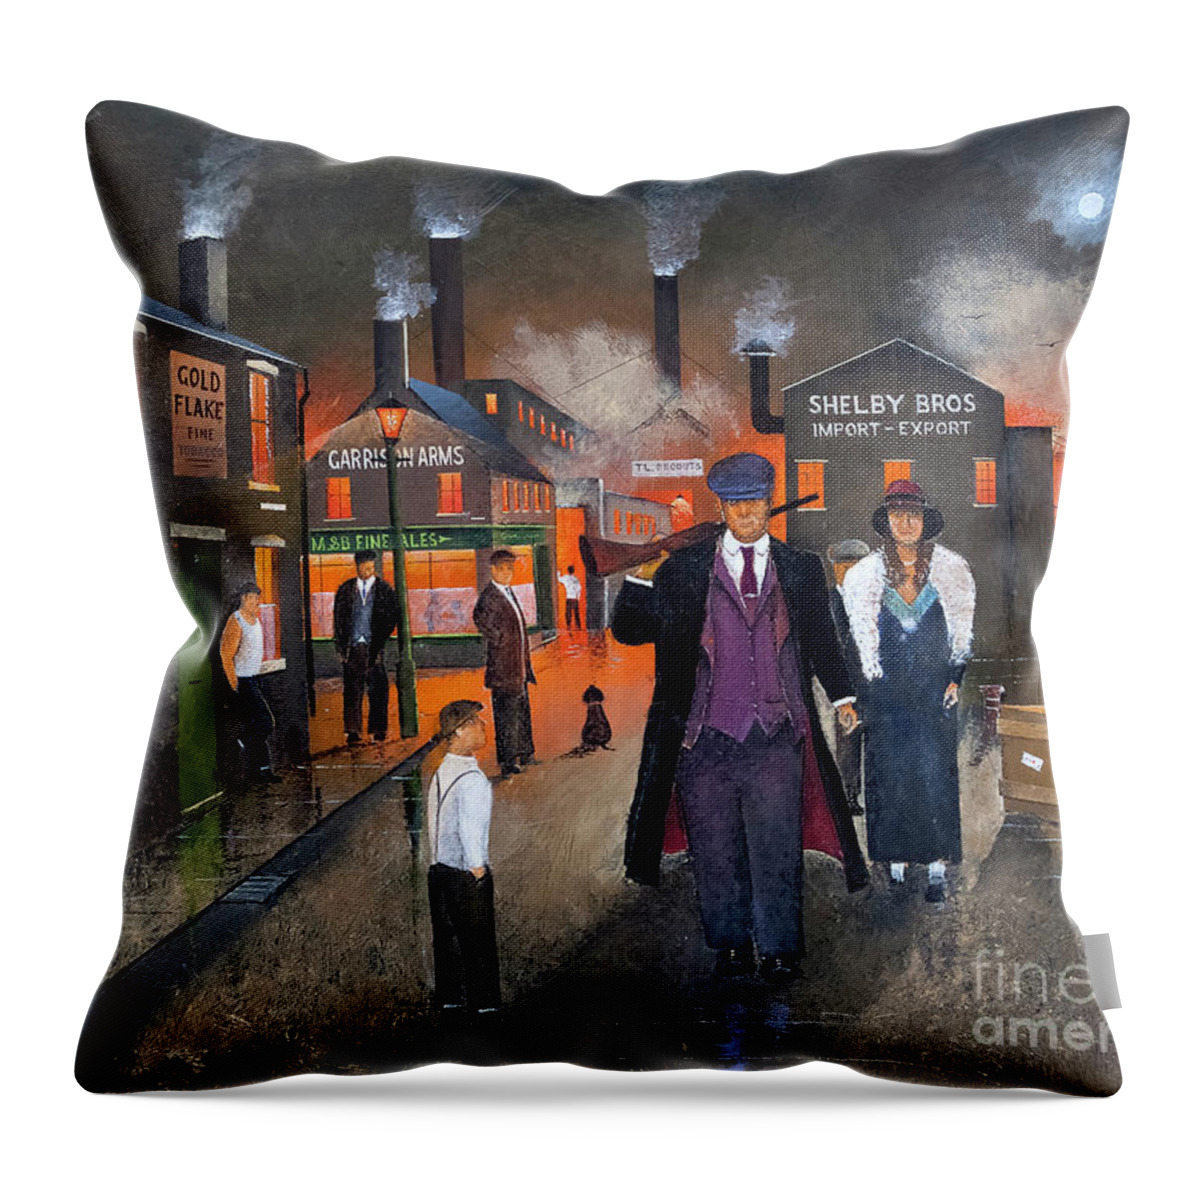 Peaky Blinders Throw Pillow featuring the painting By Order Of The Peaky Blinders by Ken Wood